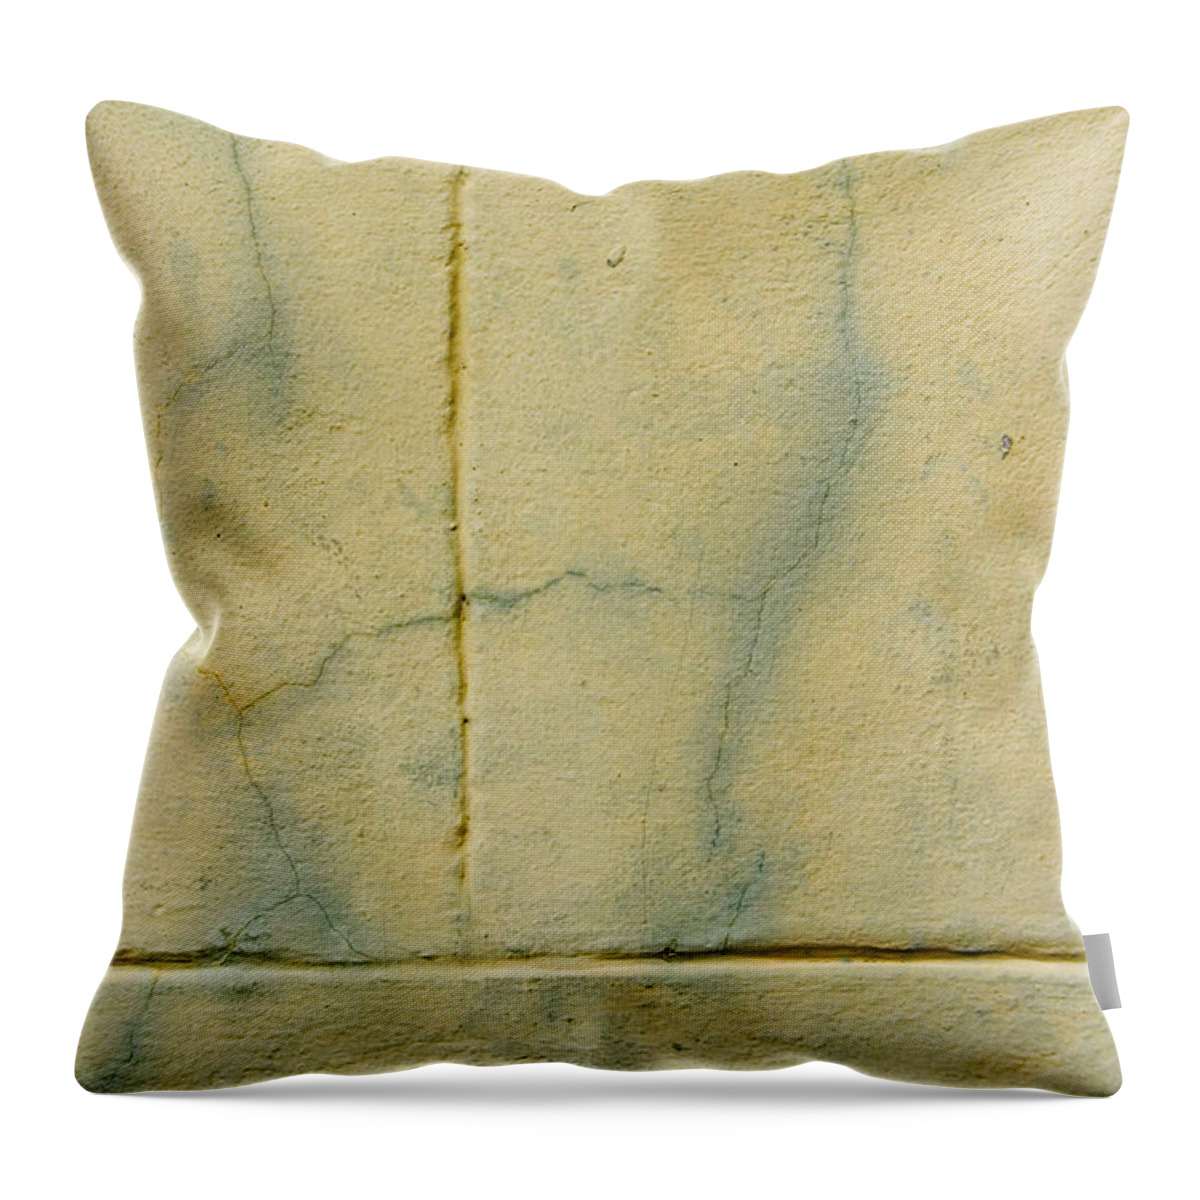 Wall Throw Pillow featuring the photograph Wallspace by Grant Groberg